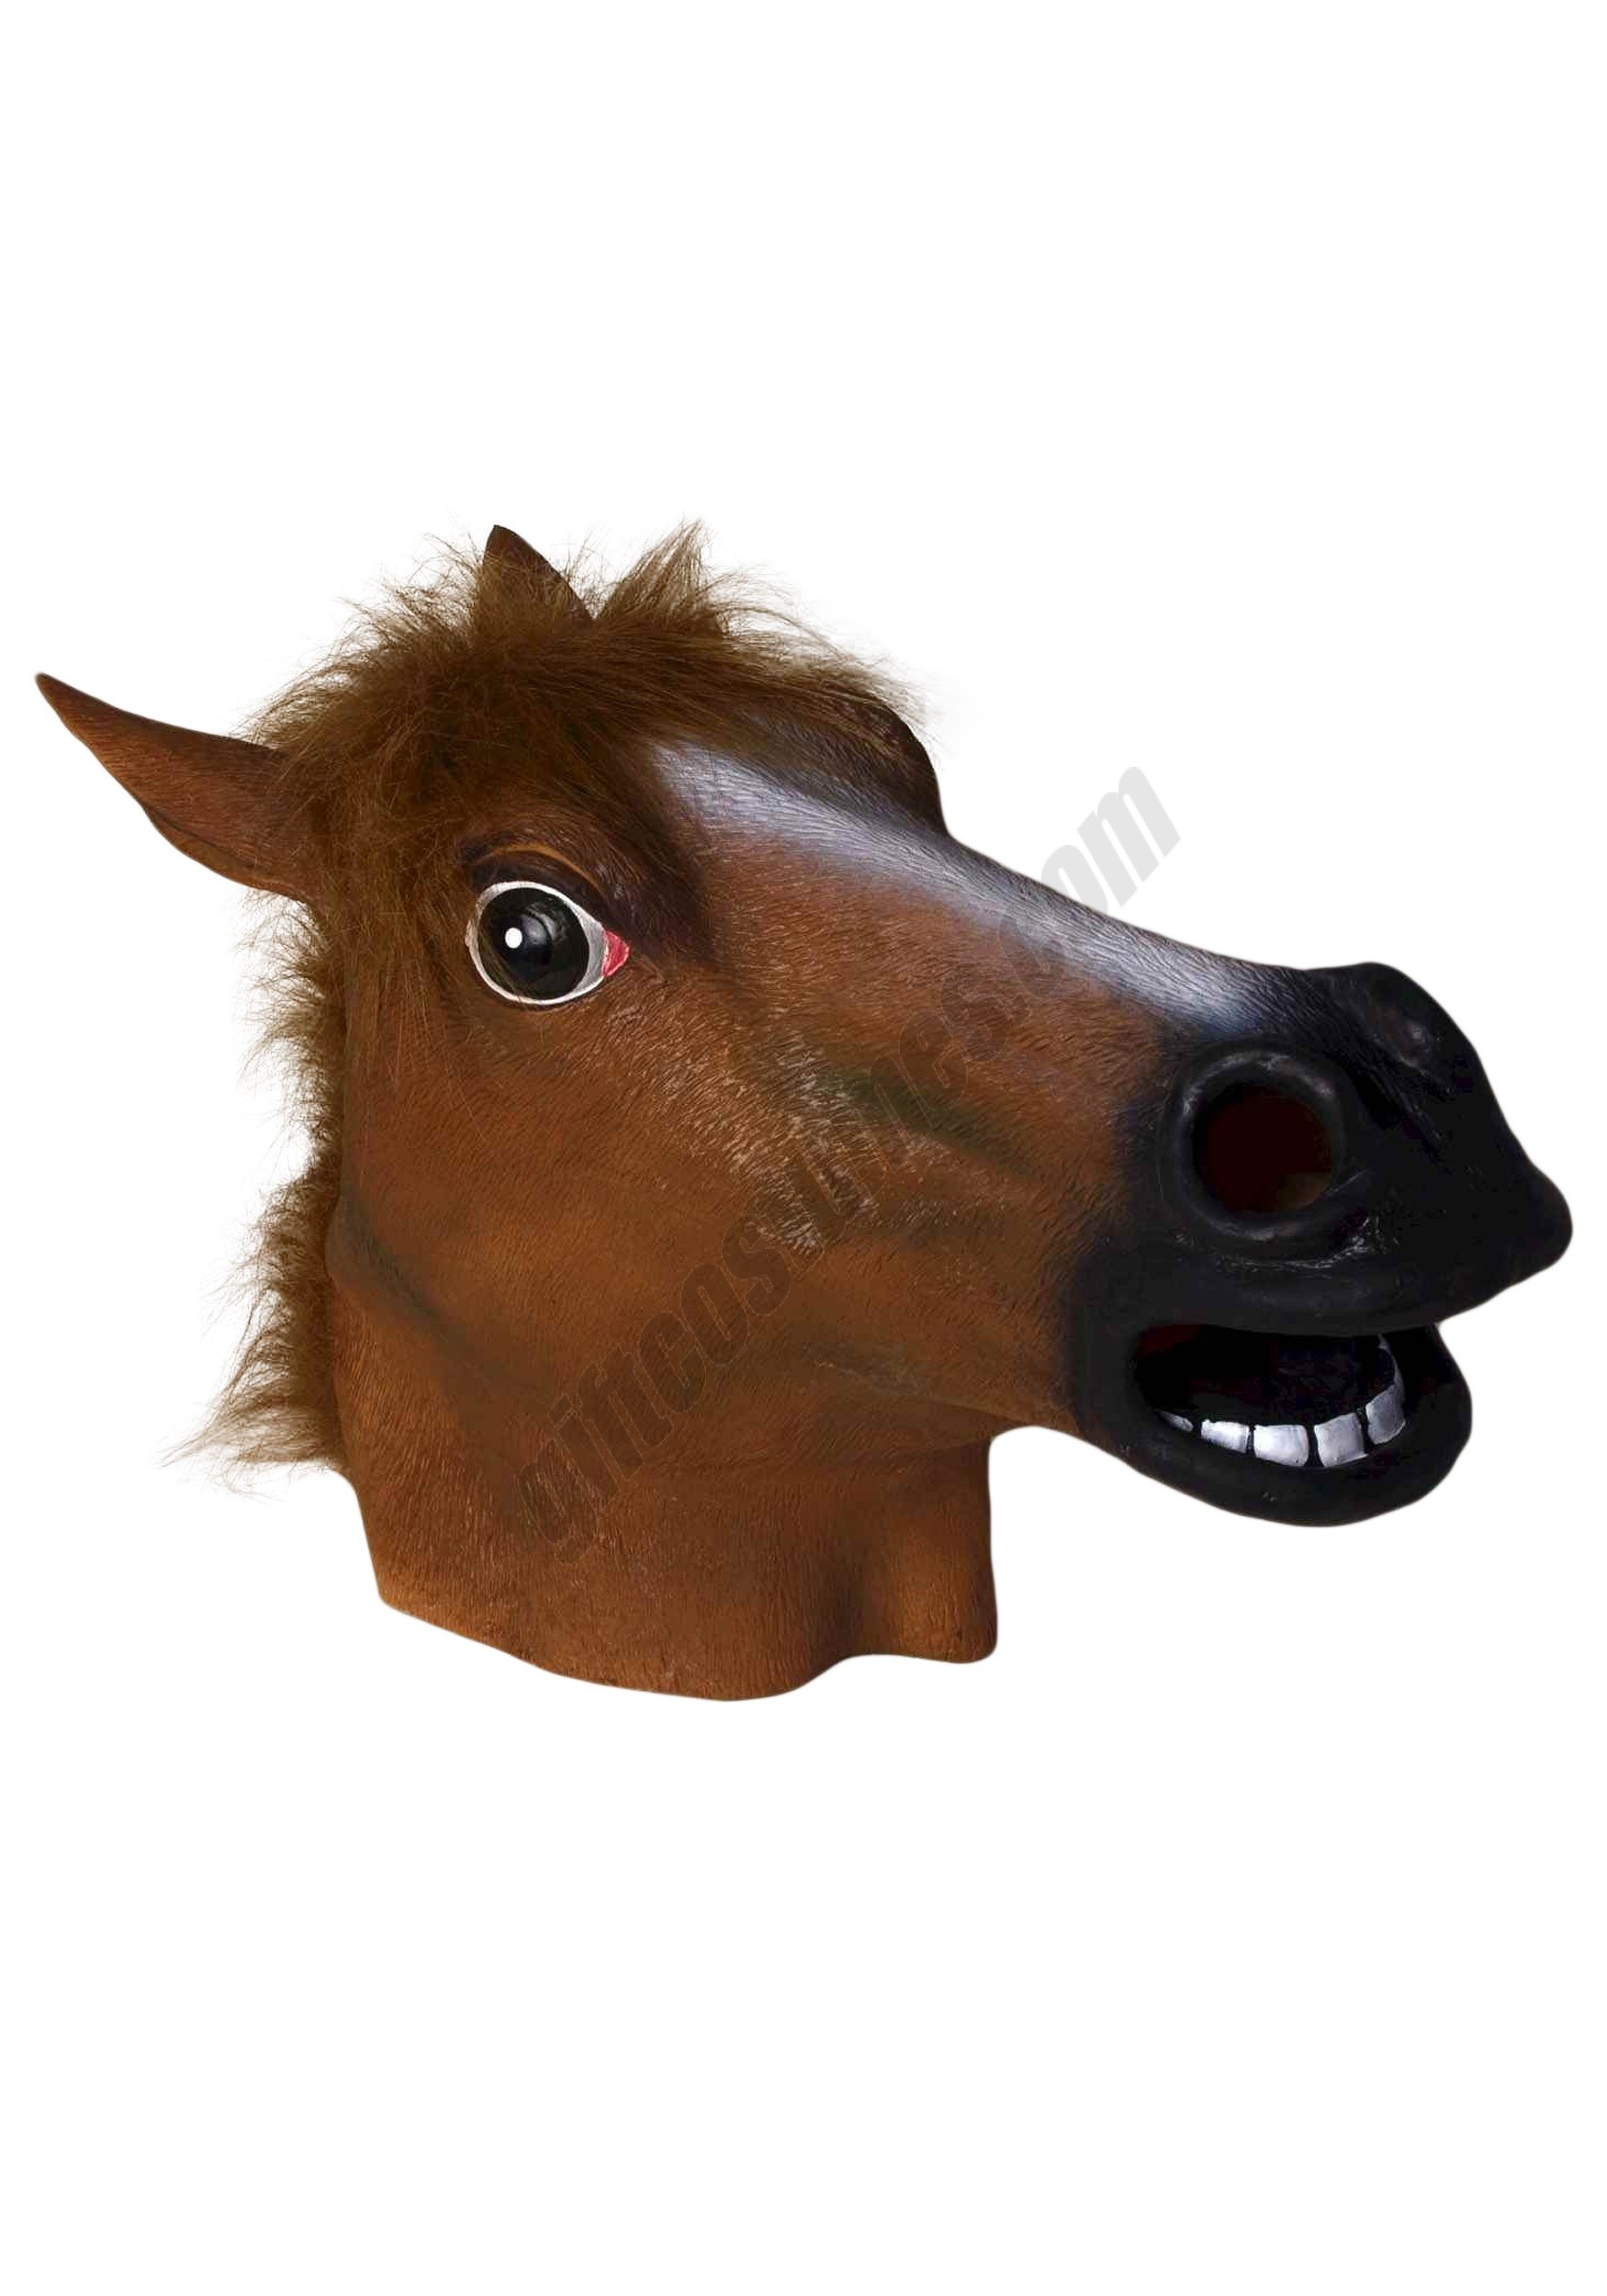 Deluxe Latex Horse Mask Promotions - Deluxe Latex Horse Mask Promotions